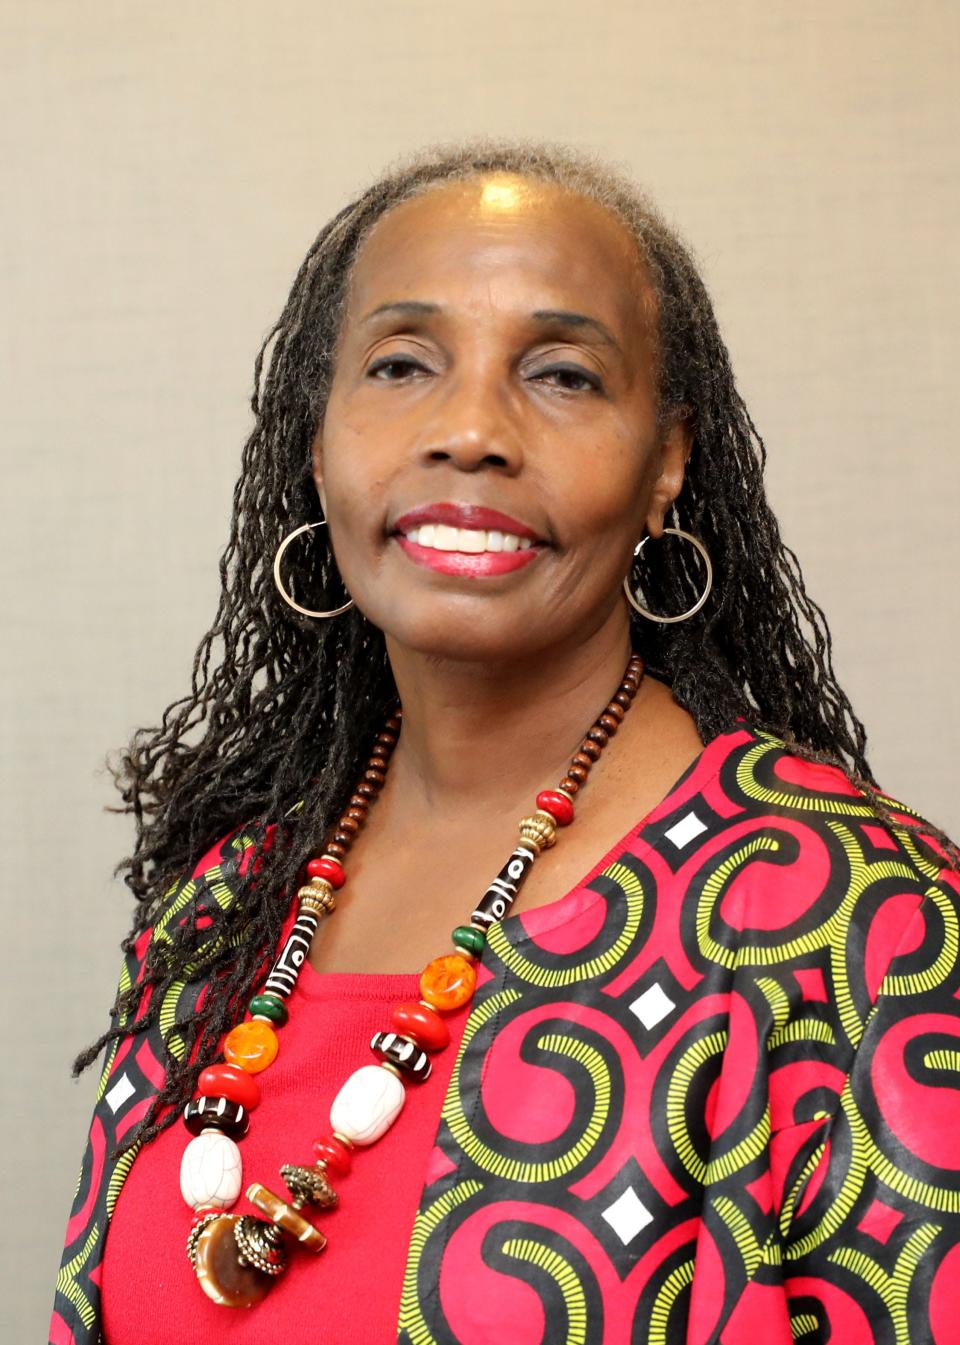 Cheryl Brannan, president and founder of Sister to Sister International, Inc., has woven math and science tutoring into her organization&#39;s work.